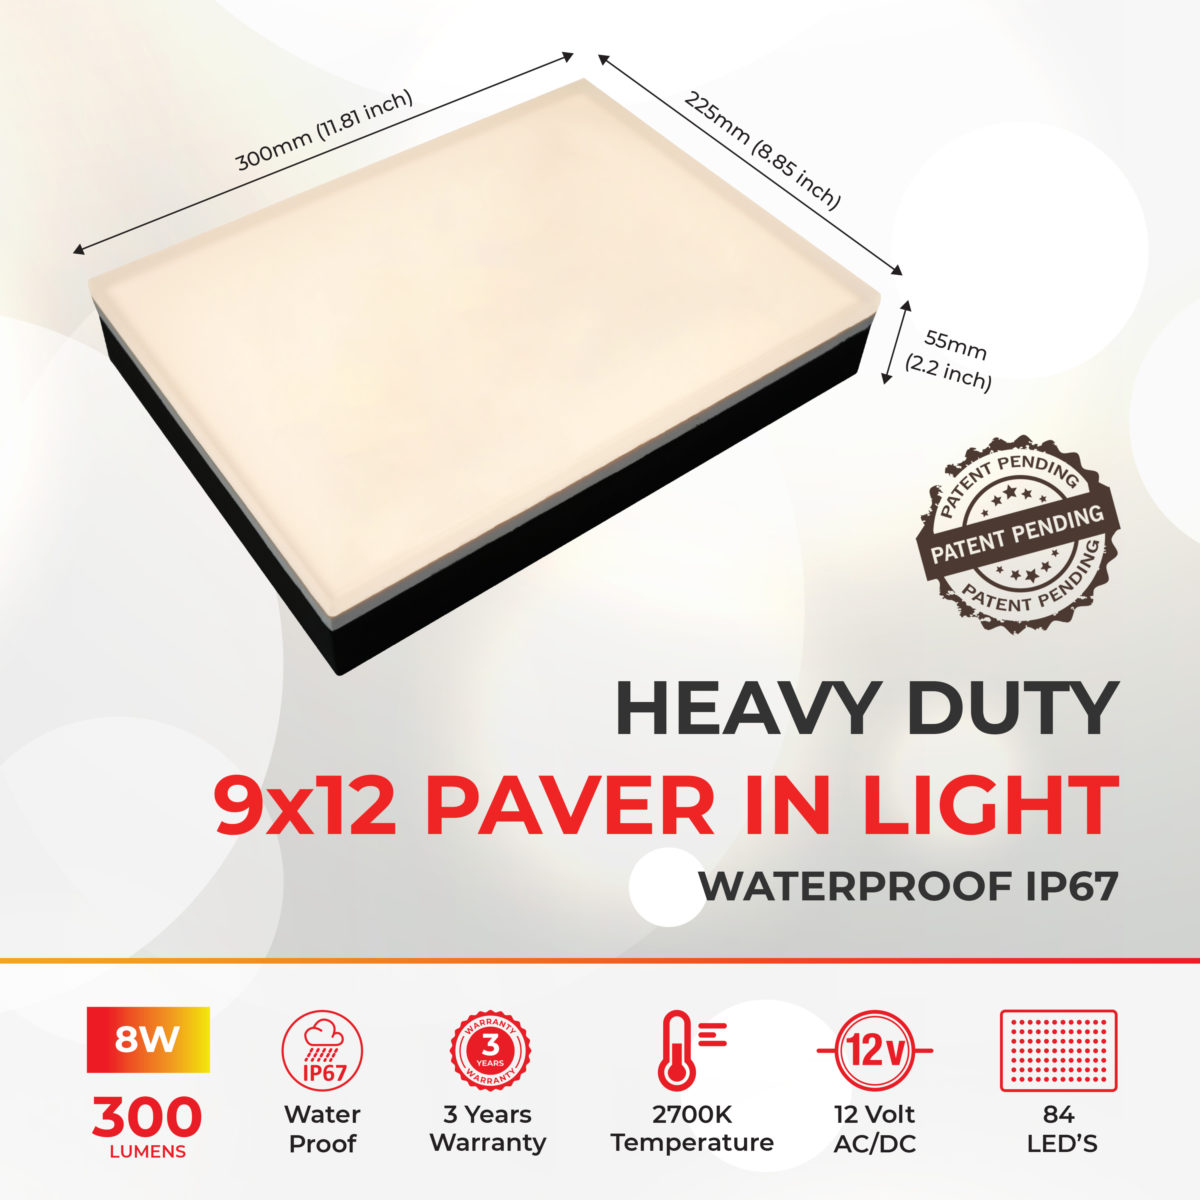 Dimensions of Lumengy Paver Light 9x12 Inch